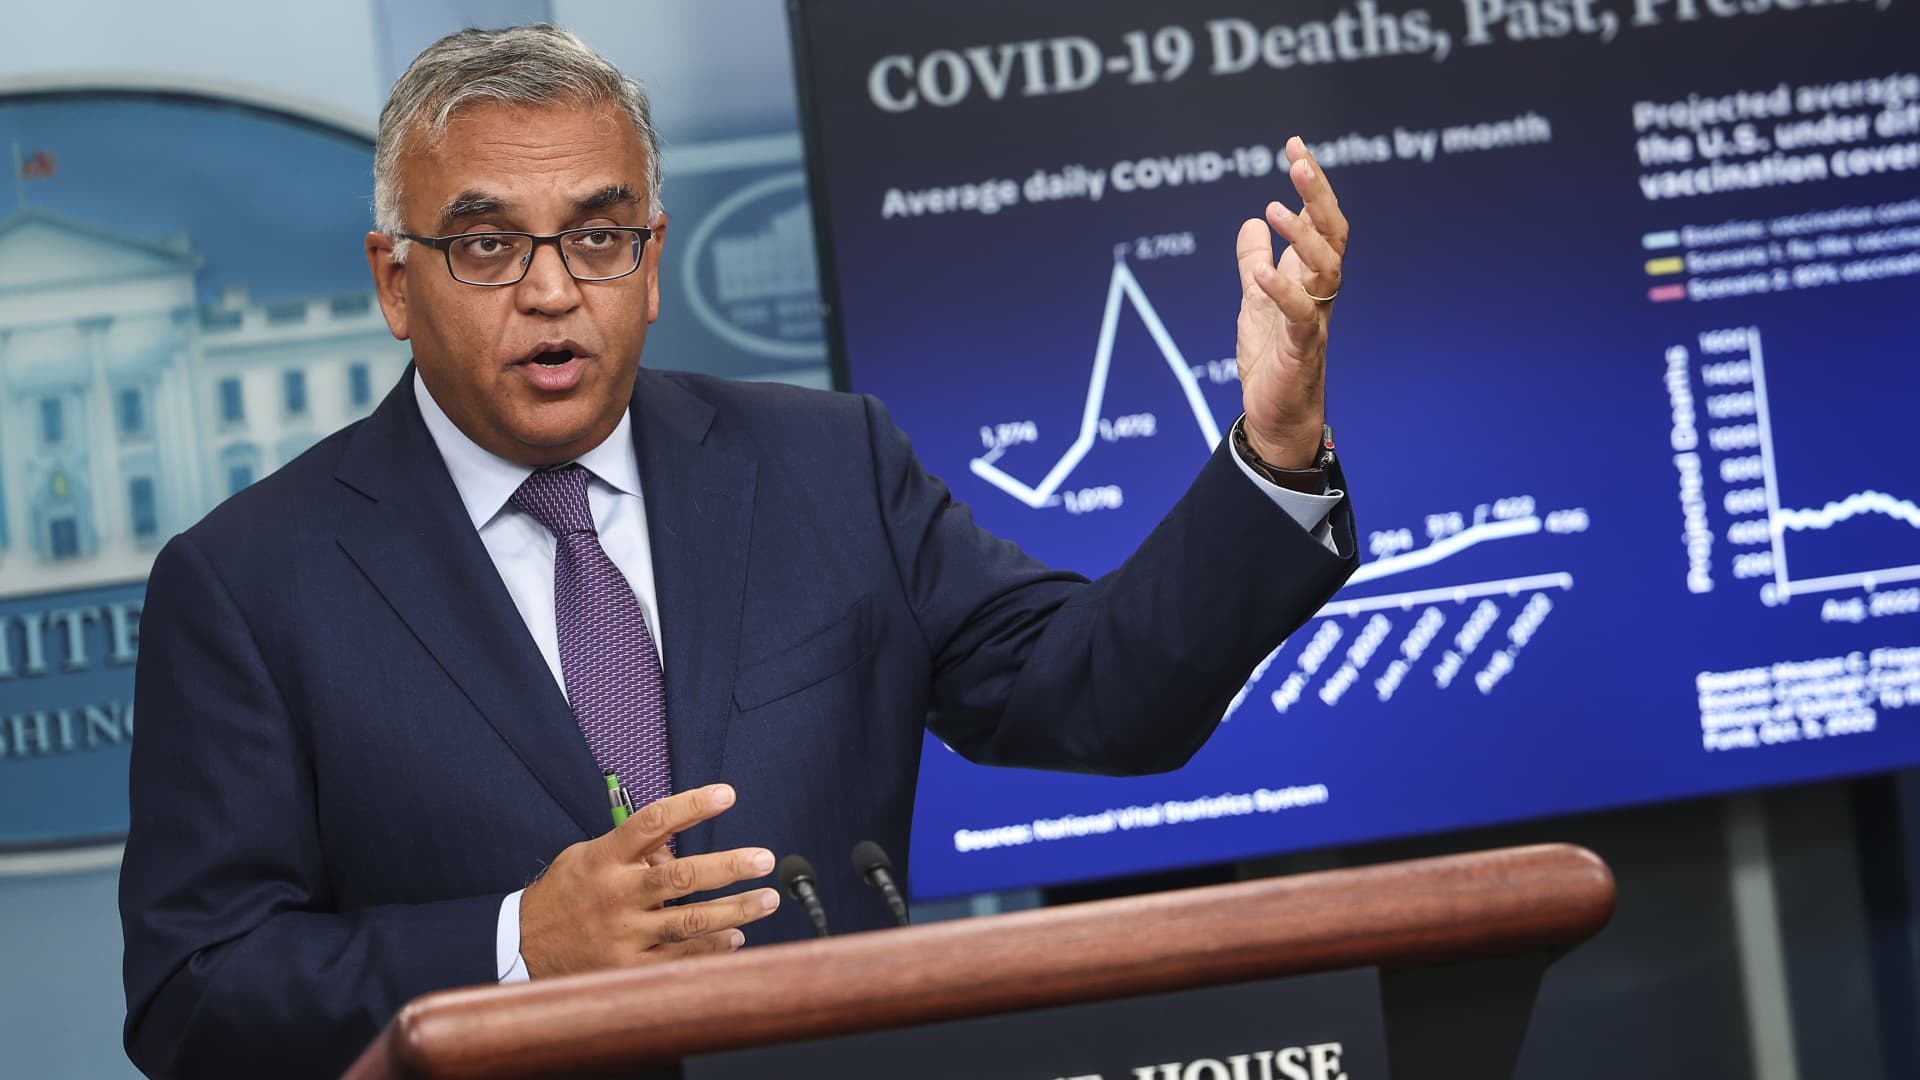 Risk of Covid death almost zero for people who are boosted and treated, White House Covid czar says